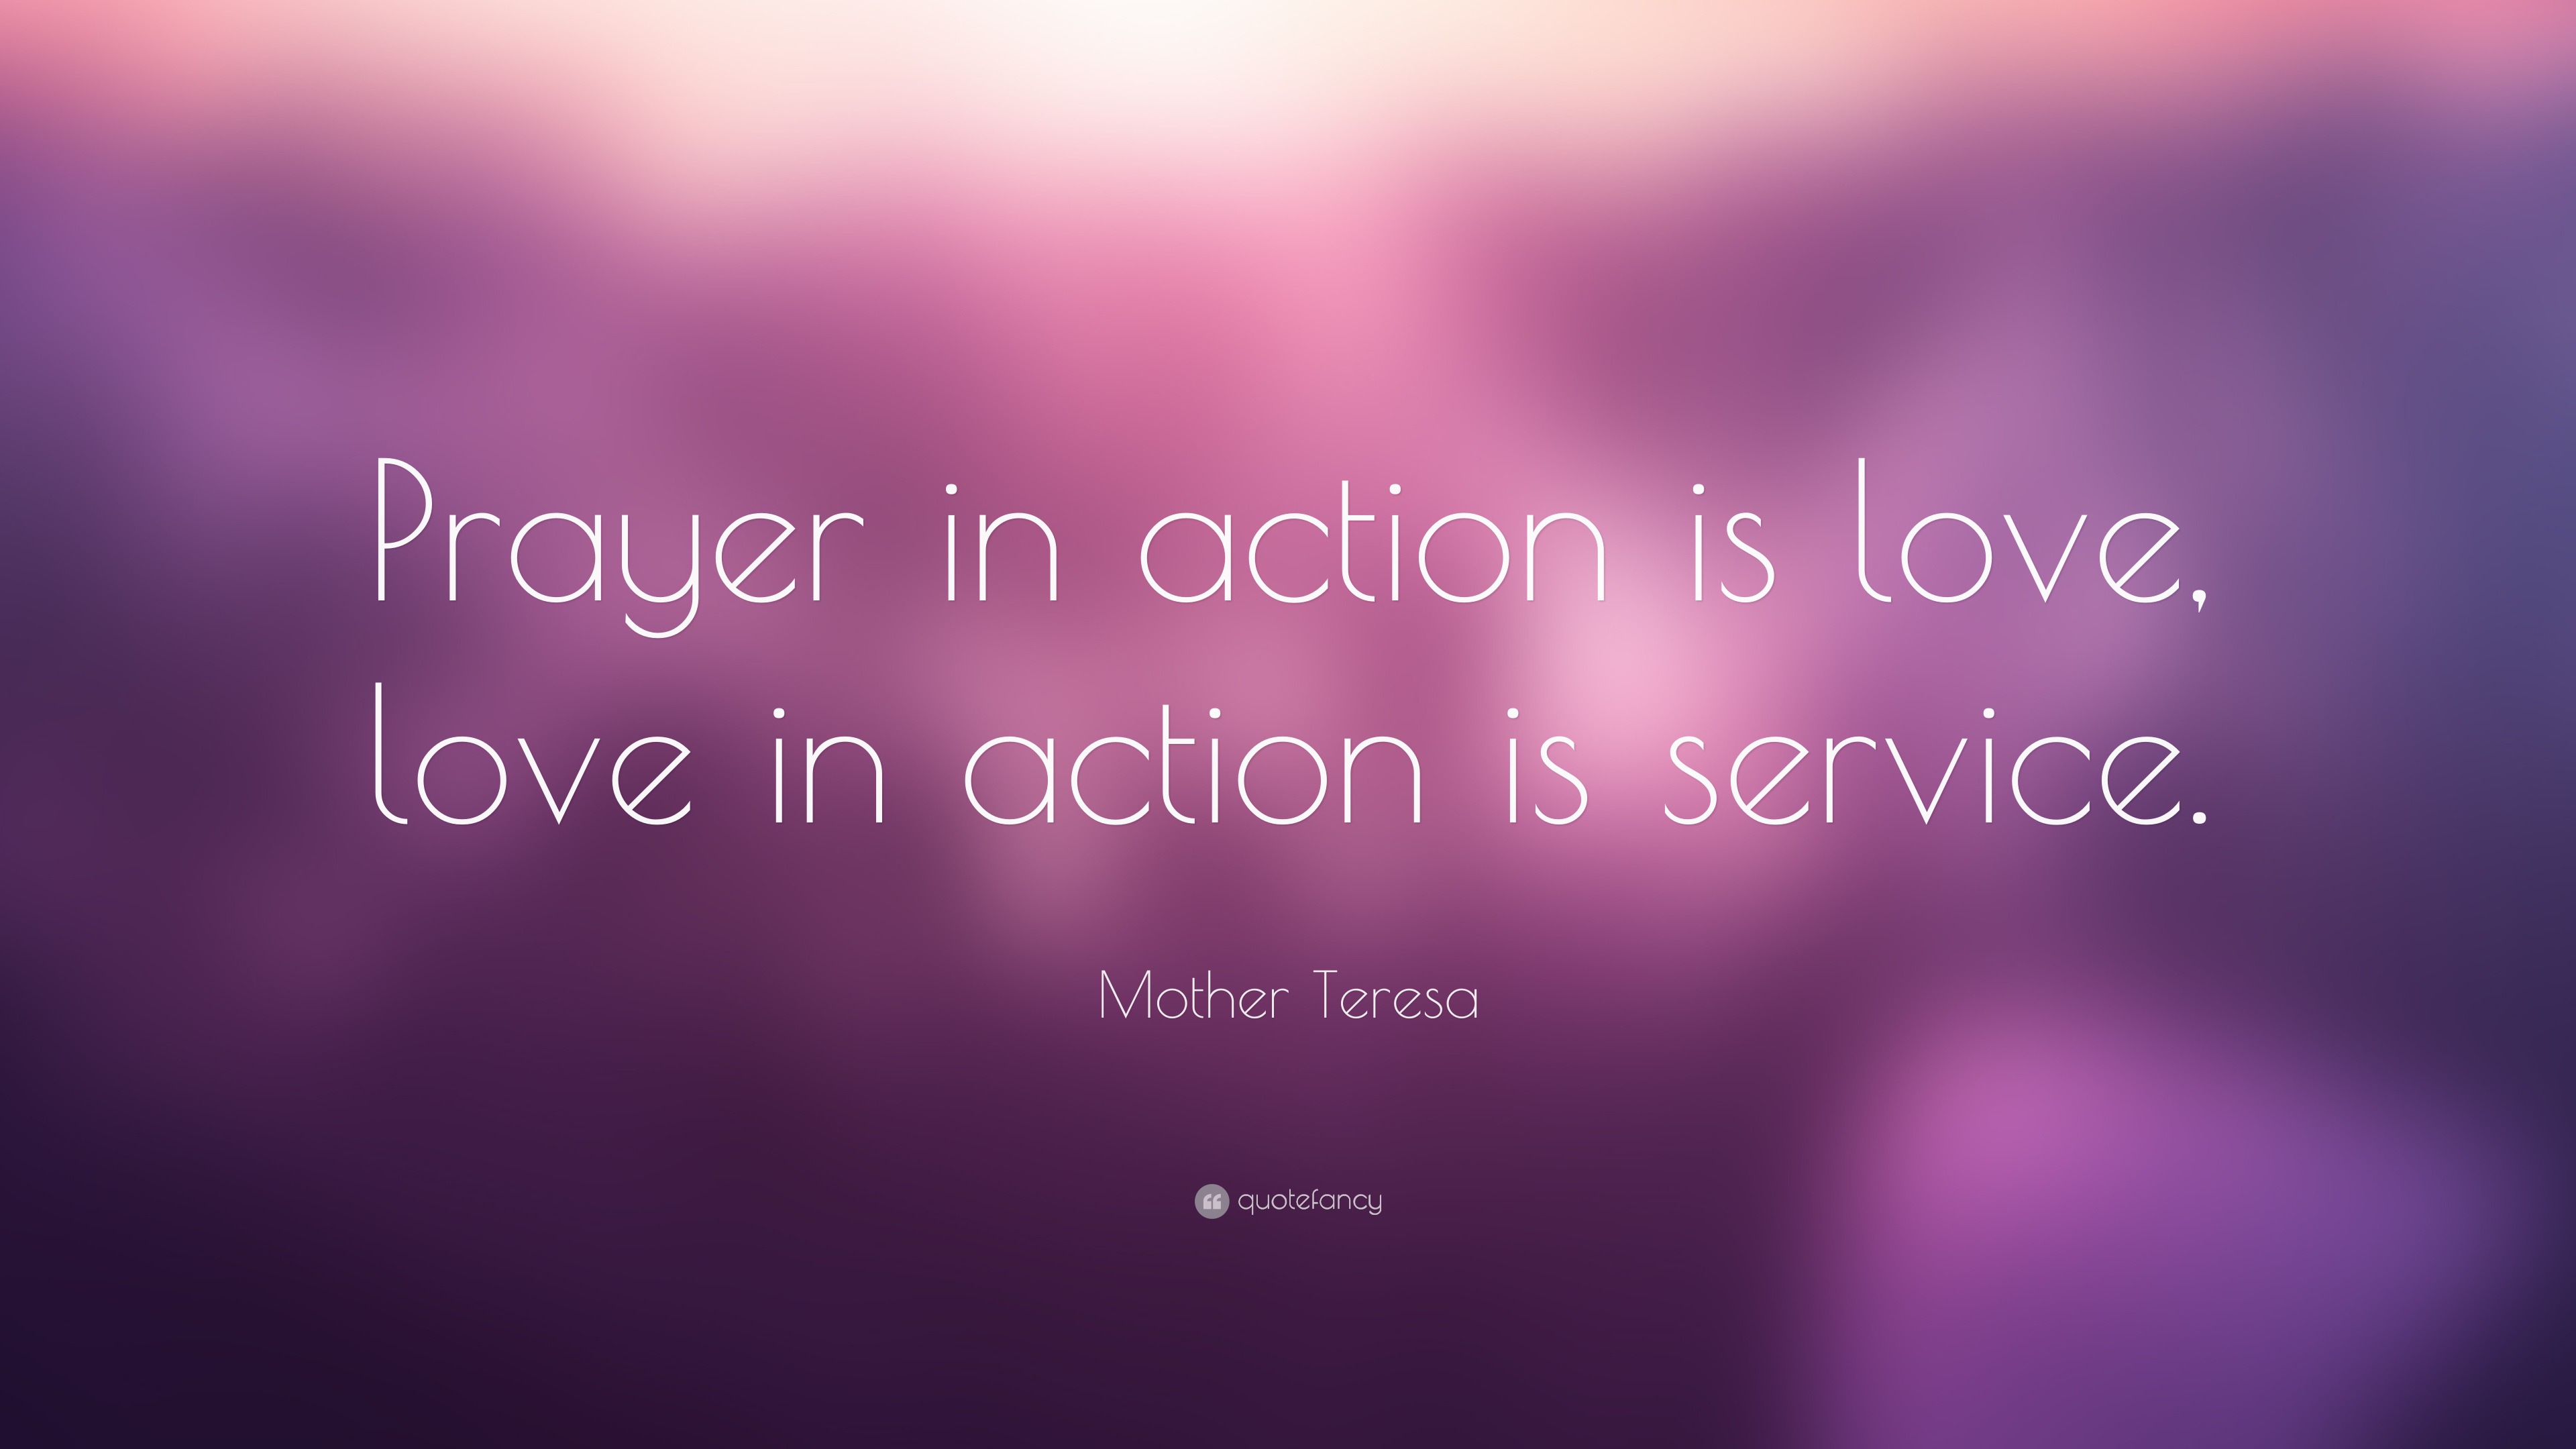 Mother Teresa Quote: “Prayer in action is love, love in action is